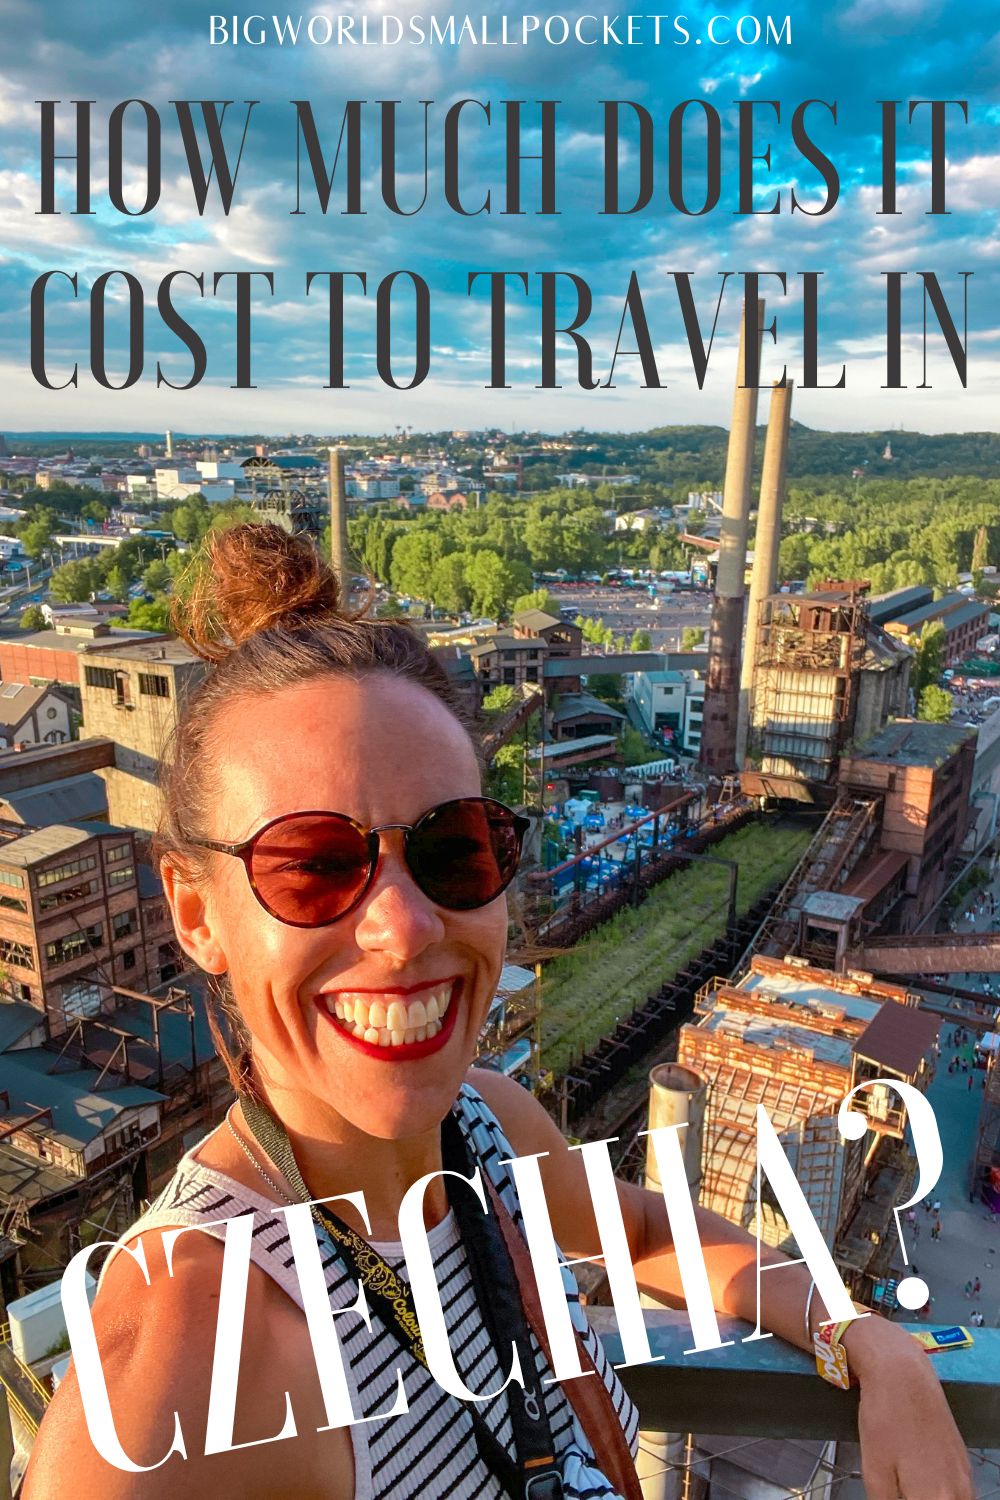 How Much Does it Cost to Travel in Czechia?